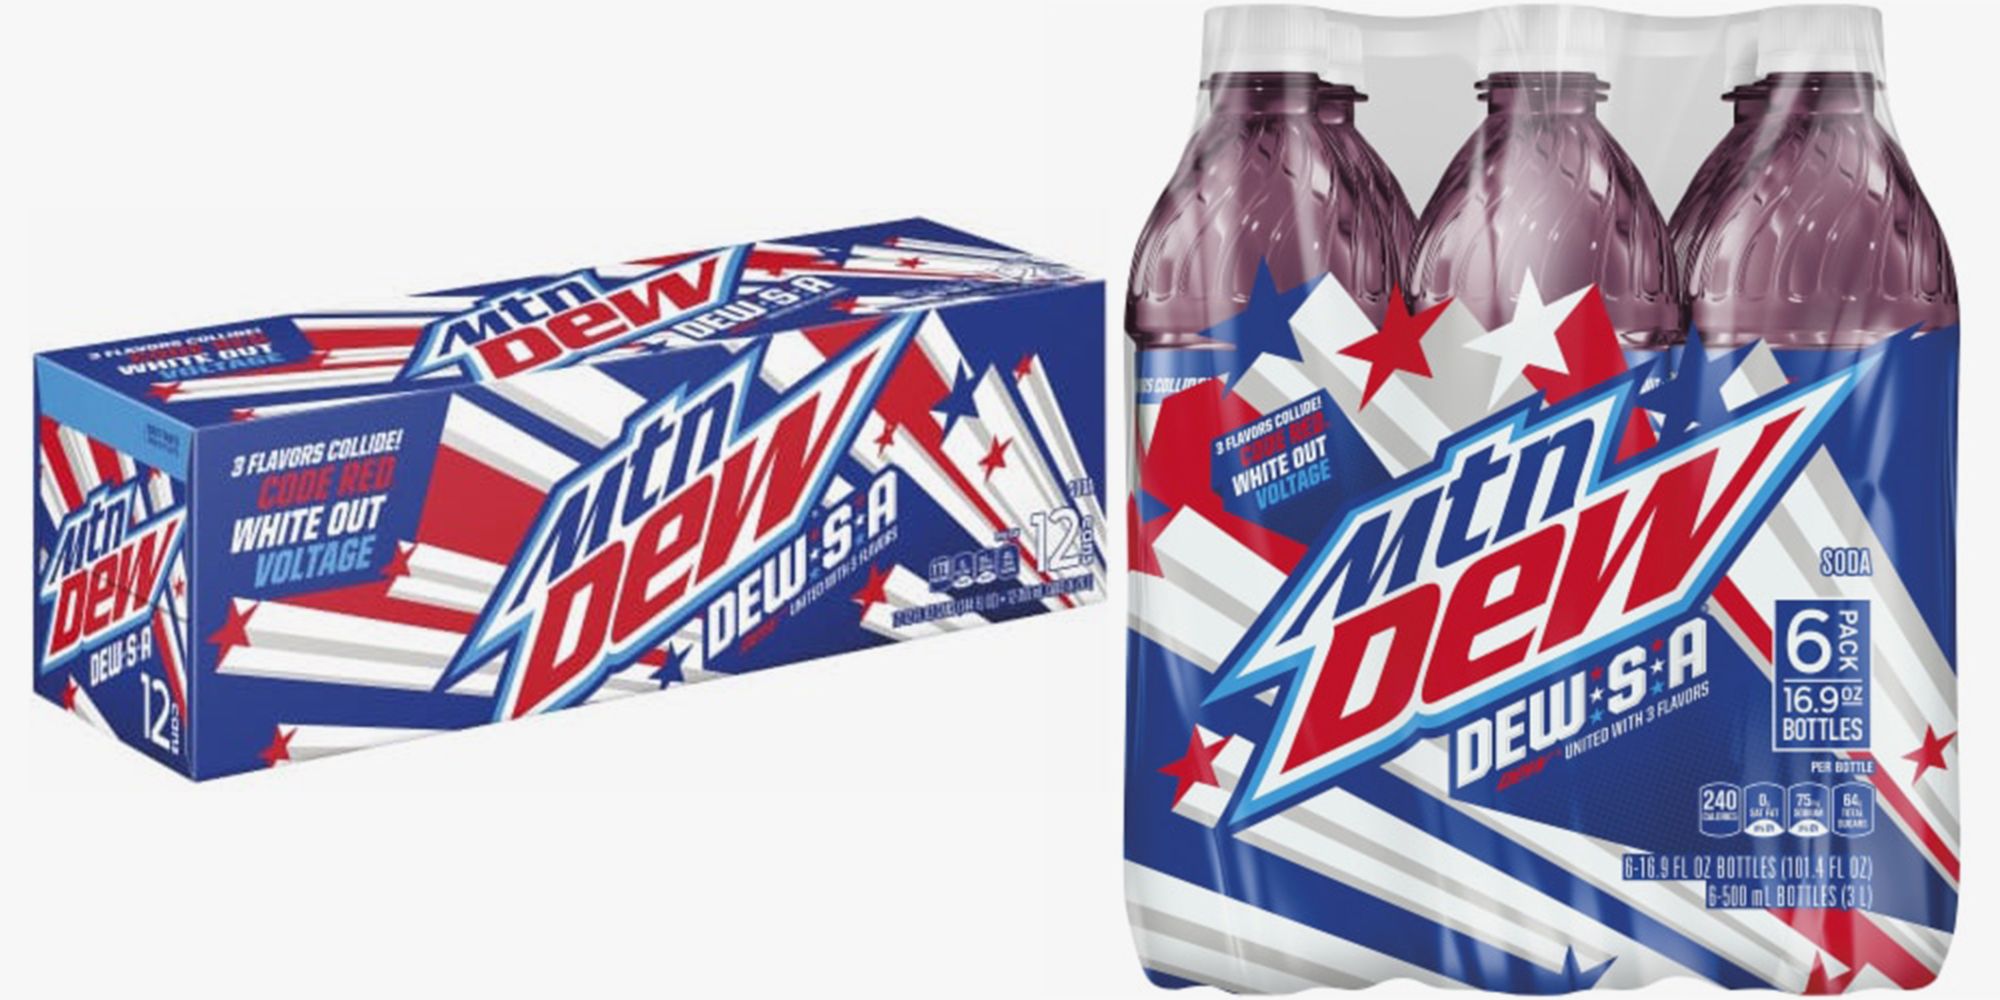 Mountain Dew S Dew S A Flavor Is Back And Combines Code Red White Out And Voltage Sodas